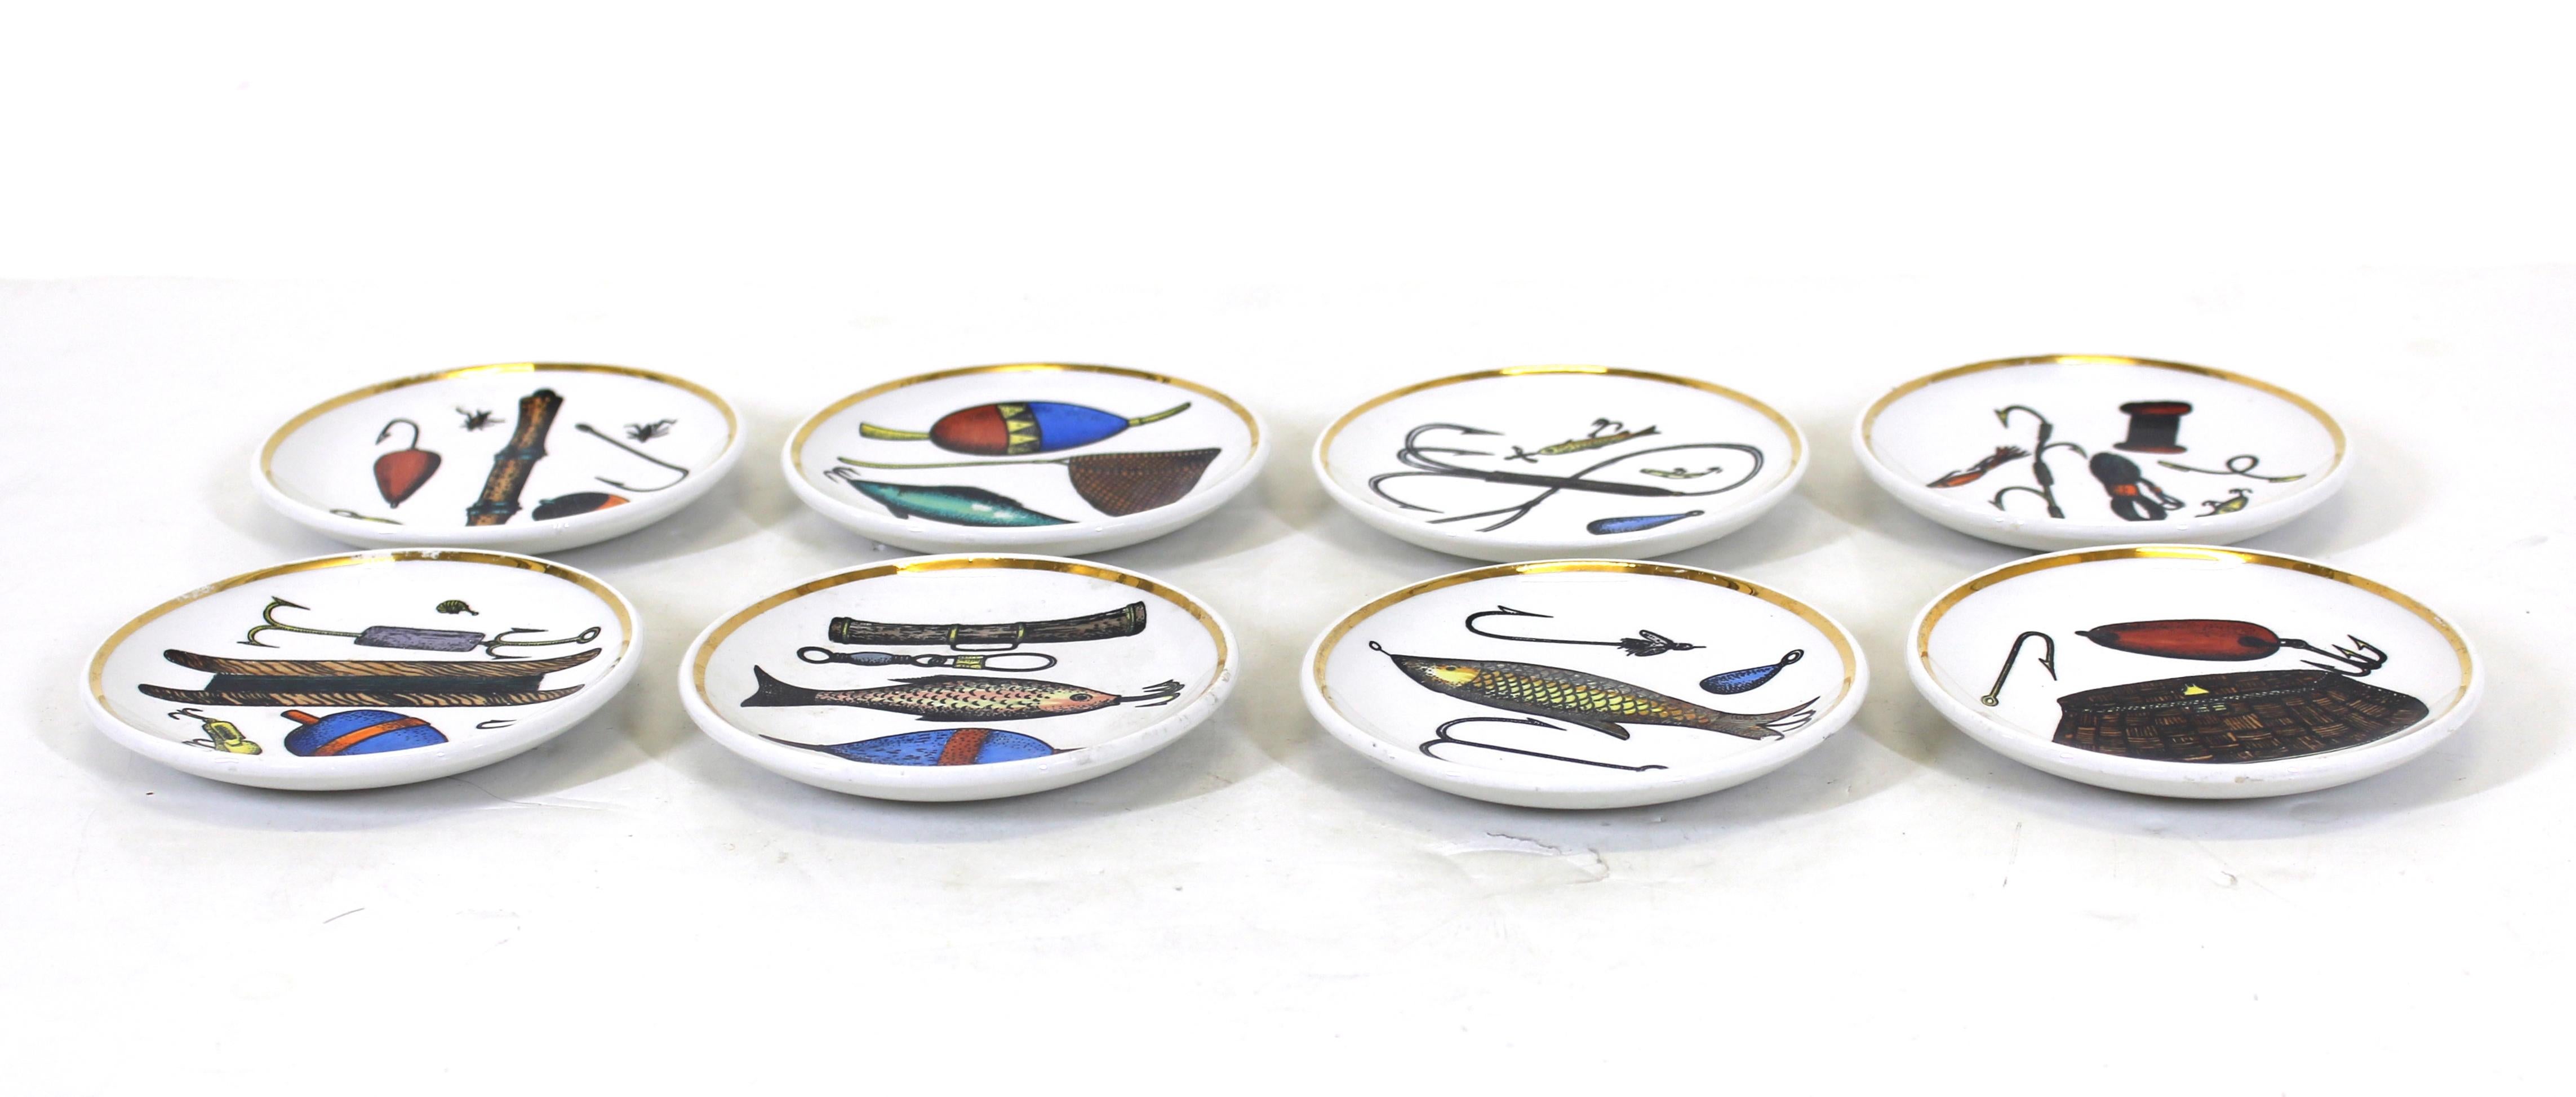 Set of eight Rosenfeld Imports coasters with a sportsman or fisherman theme in silver, gold and multicolor ceramic, made in Italy, likely by Fornasetti during the 1960's. The bottoms are marked 'Made in Italy for Rosenfeld imports'. Fornasetti